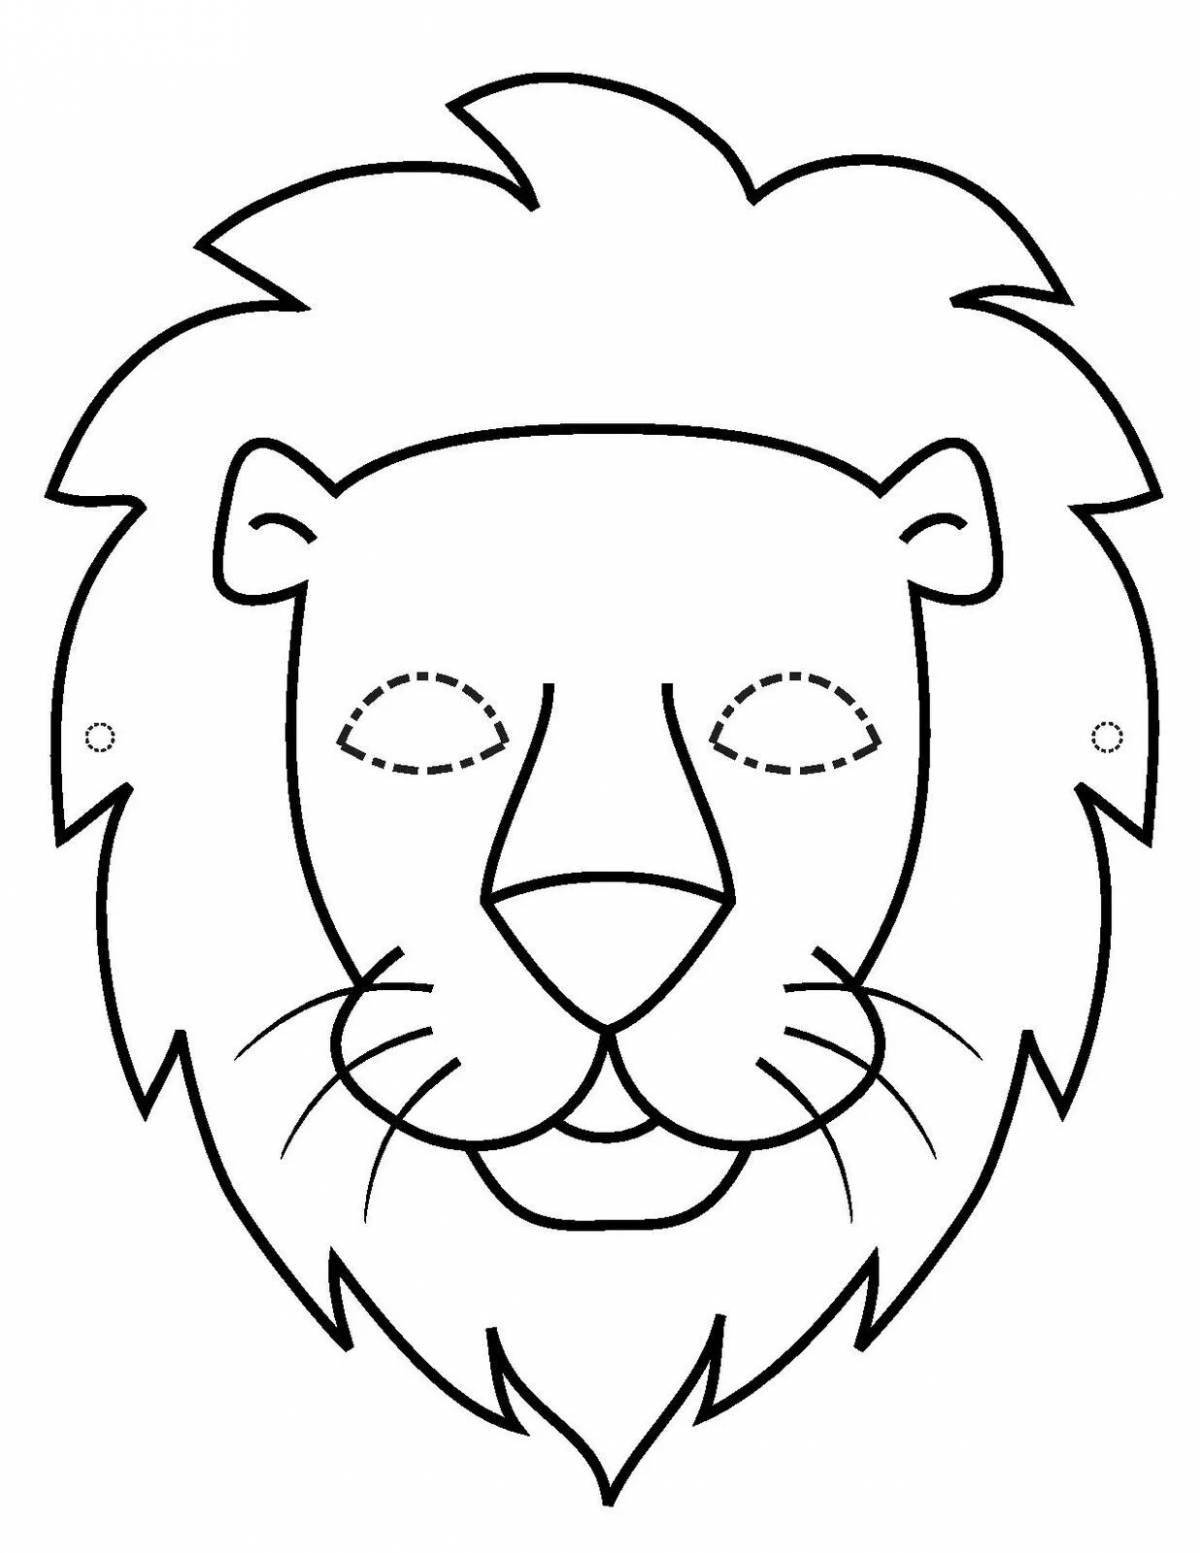 Royal lion head coloring page